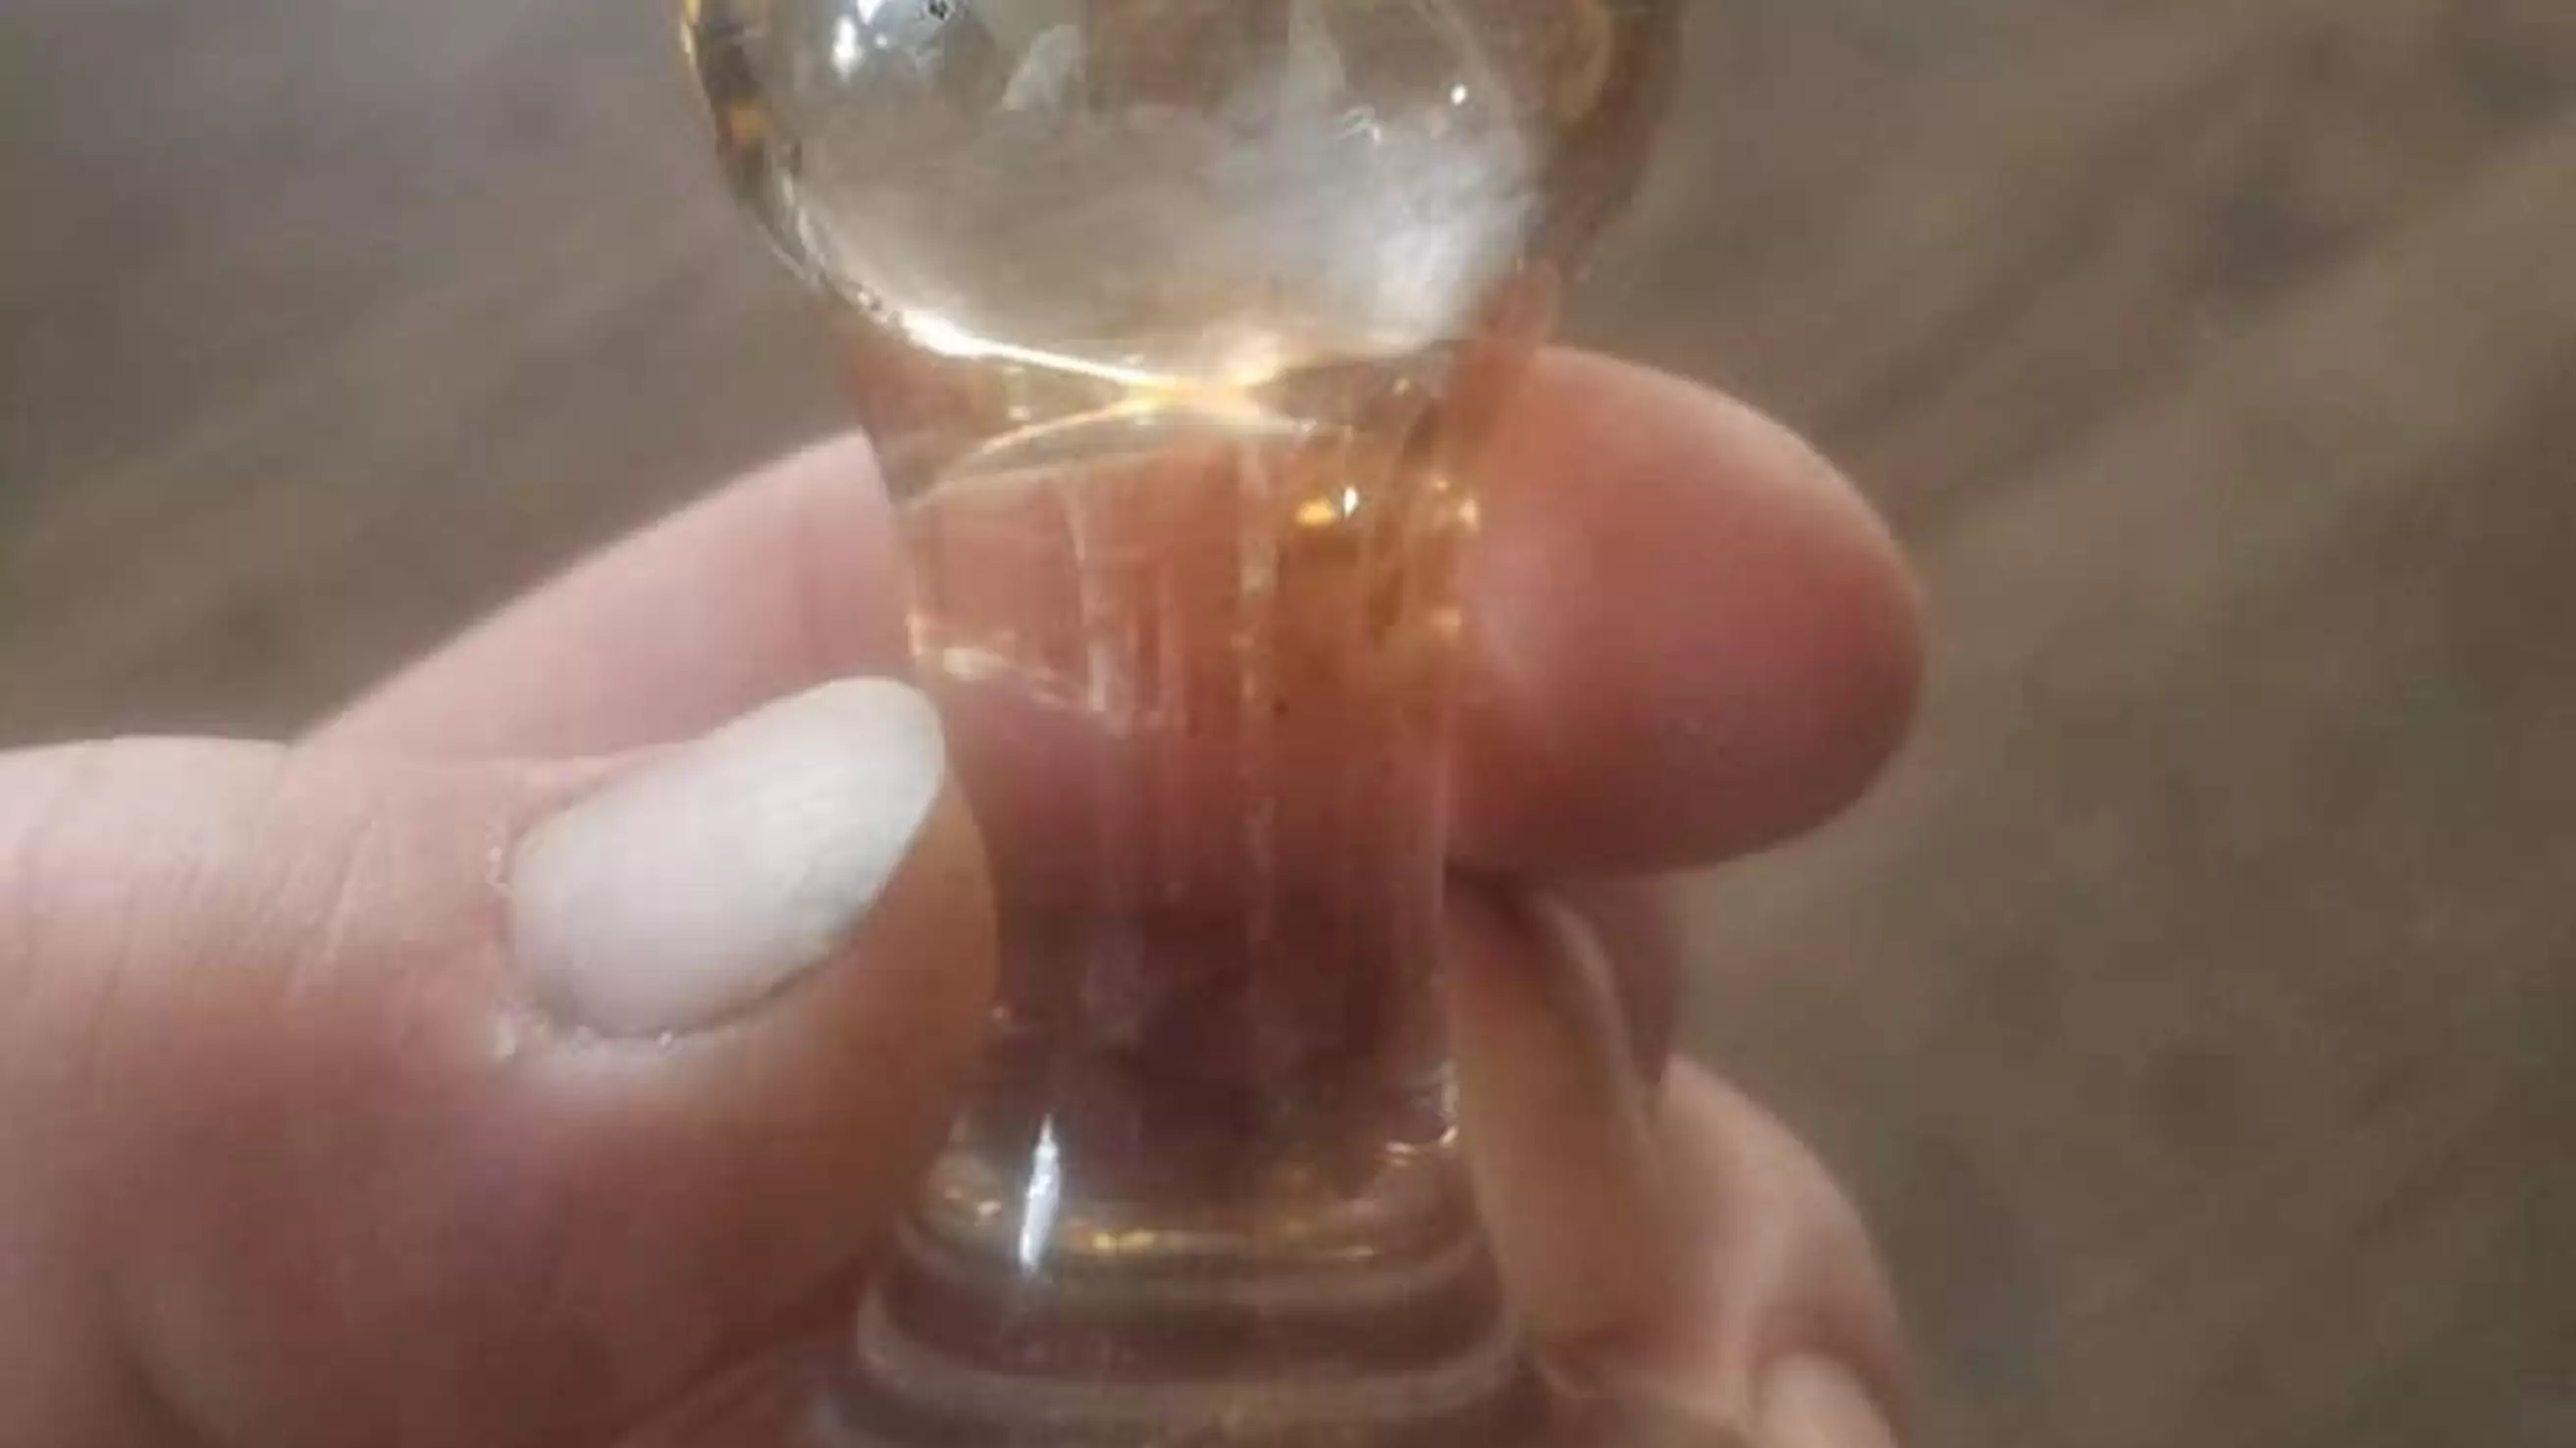 Churchgoer Appeals For Experts To Identify 'Vintage Bottle Stopper' Only To Discover It's A Sex Toy